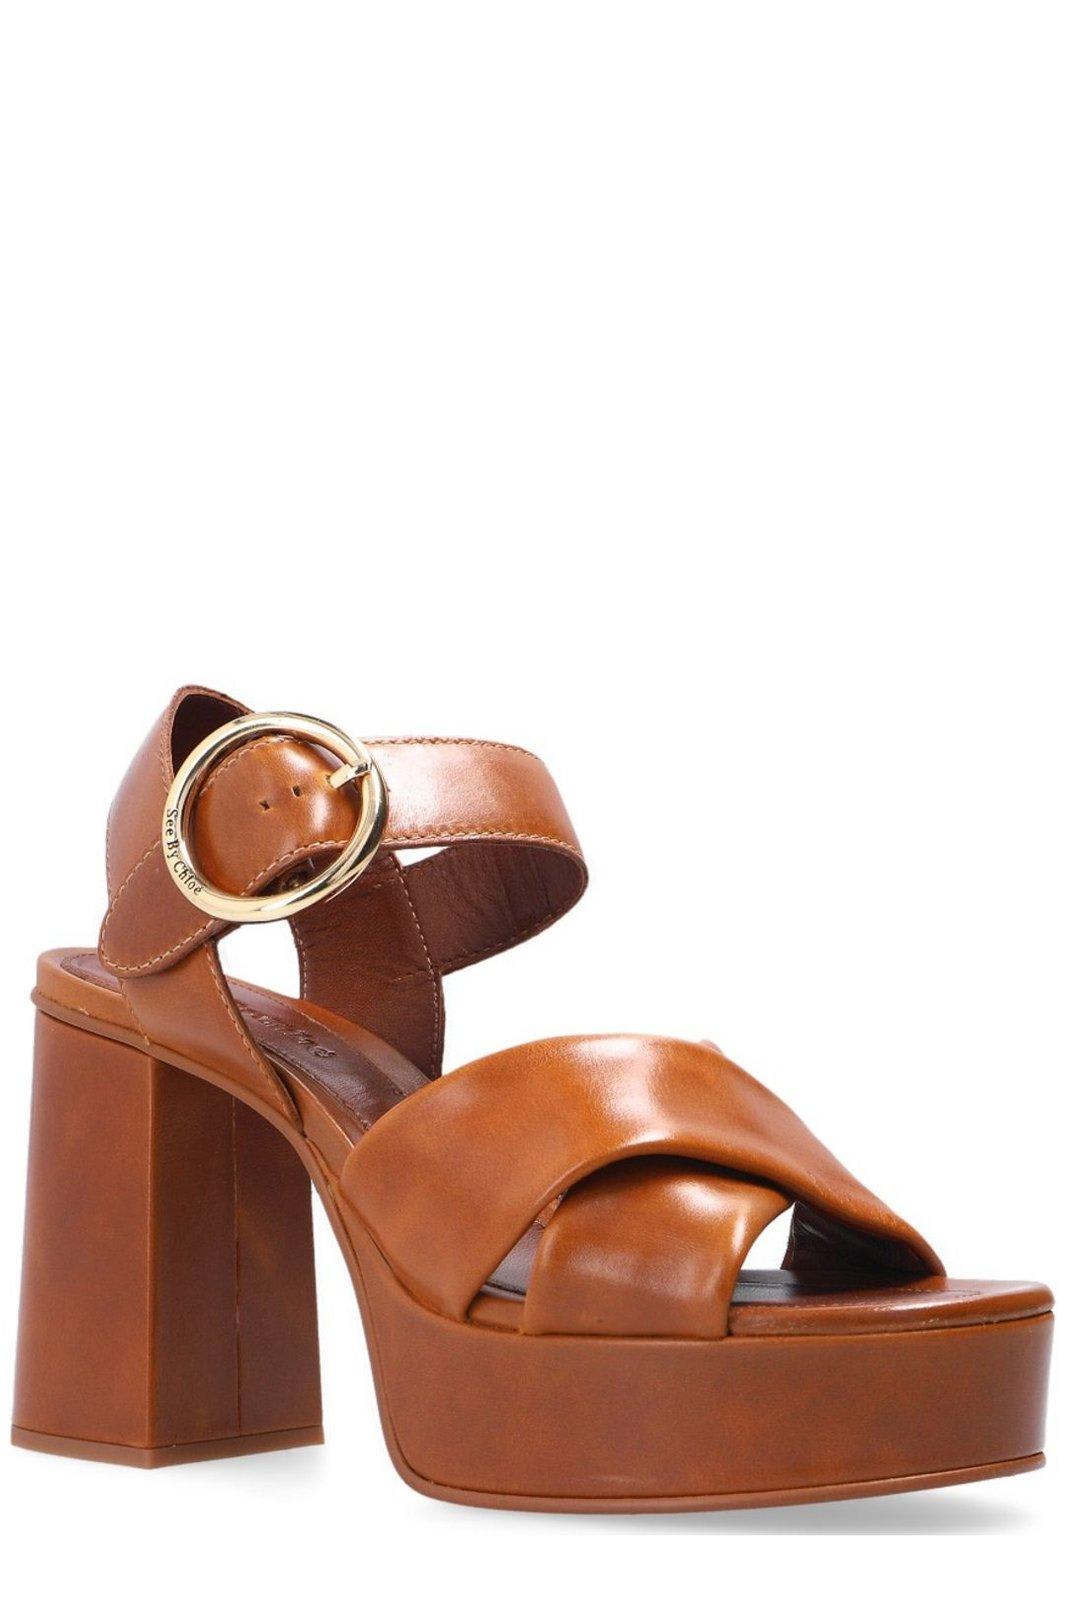 Shop See By Chloé Lyna Platform Sandals In Tan